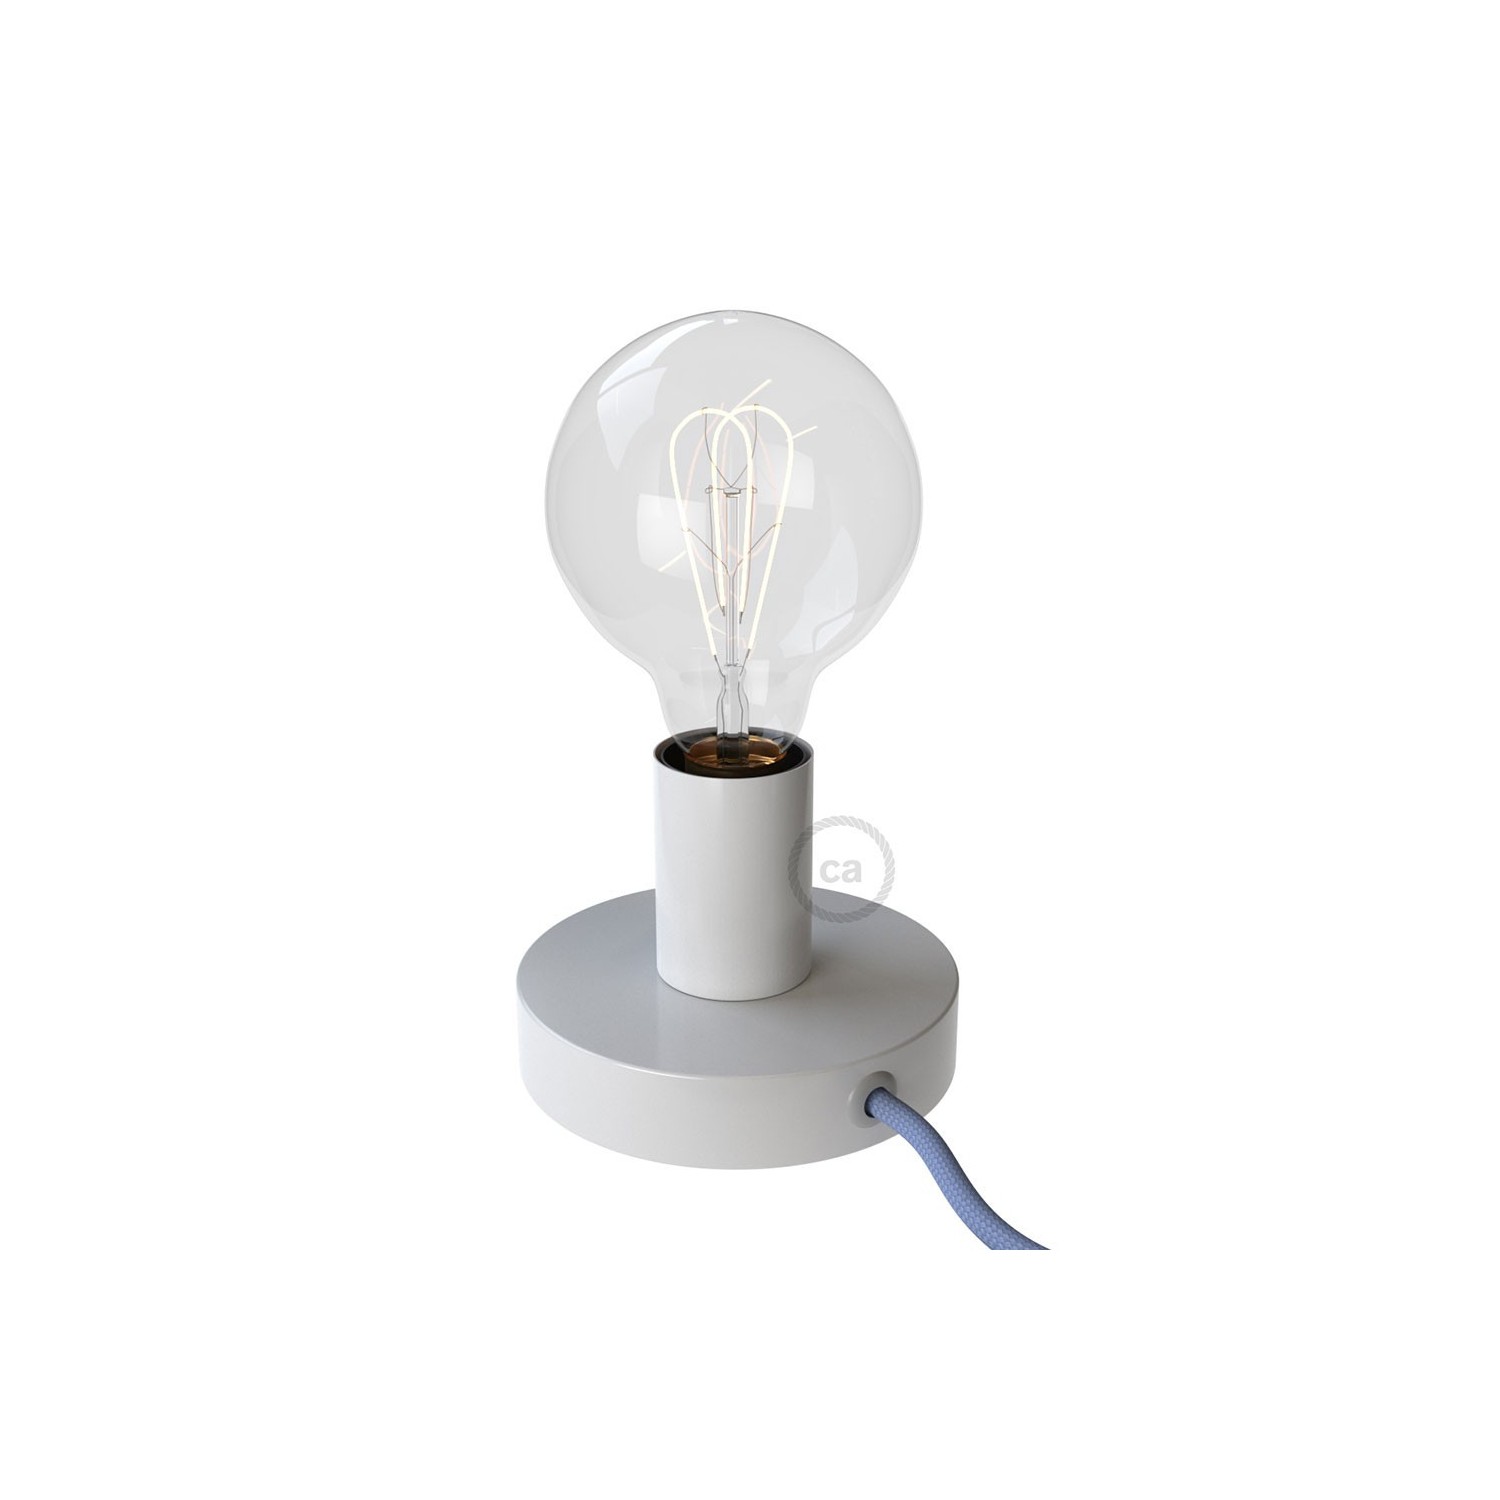 Posaluce, the white metal table lamp, with textile cable, in-line switch and english plug